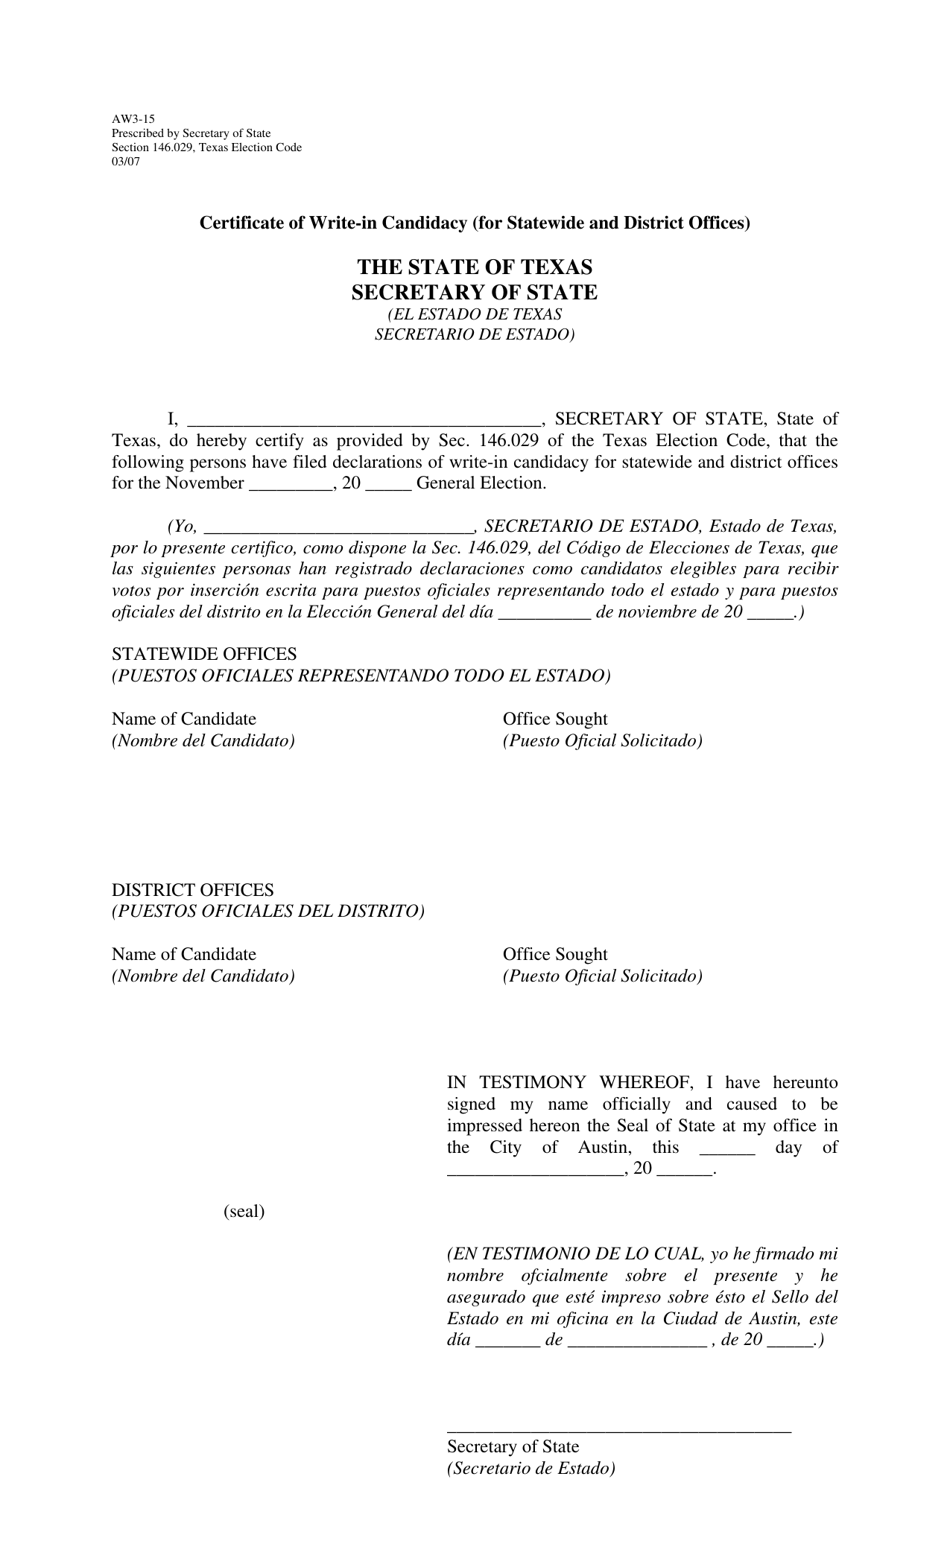 Form AW3-15 Certificate of Write-In Candidacy (For Statewide and District Offices) - Texas (English/Spanish), Page 1